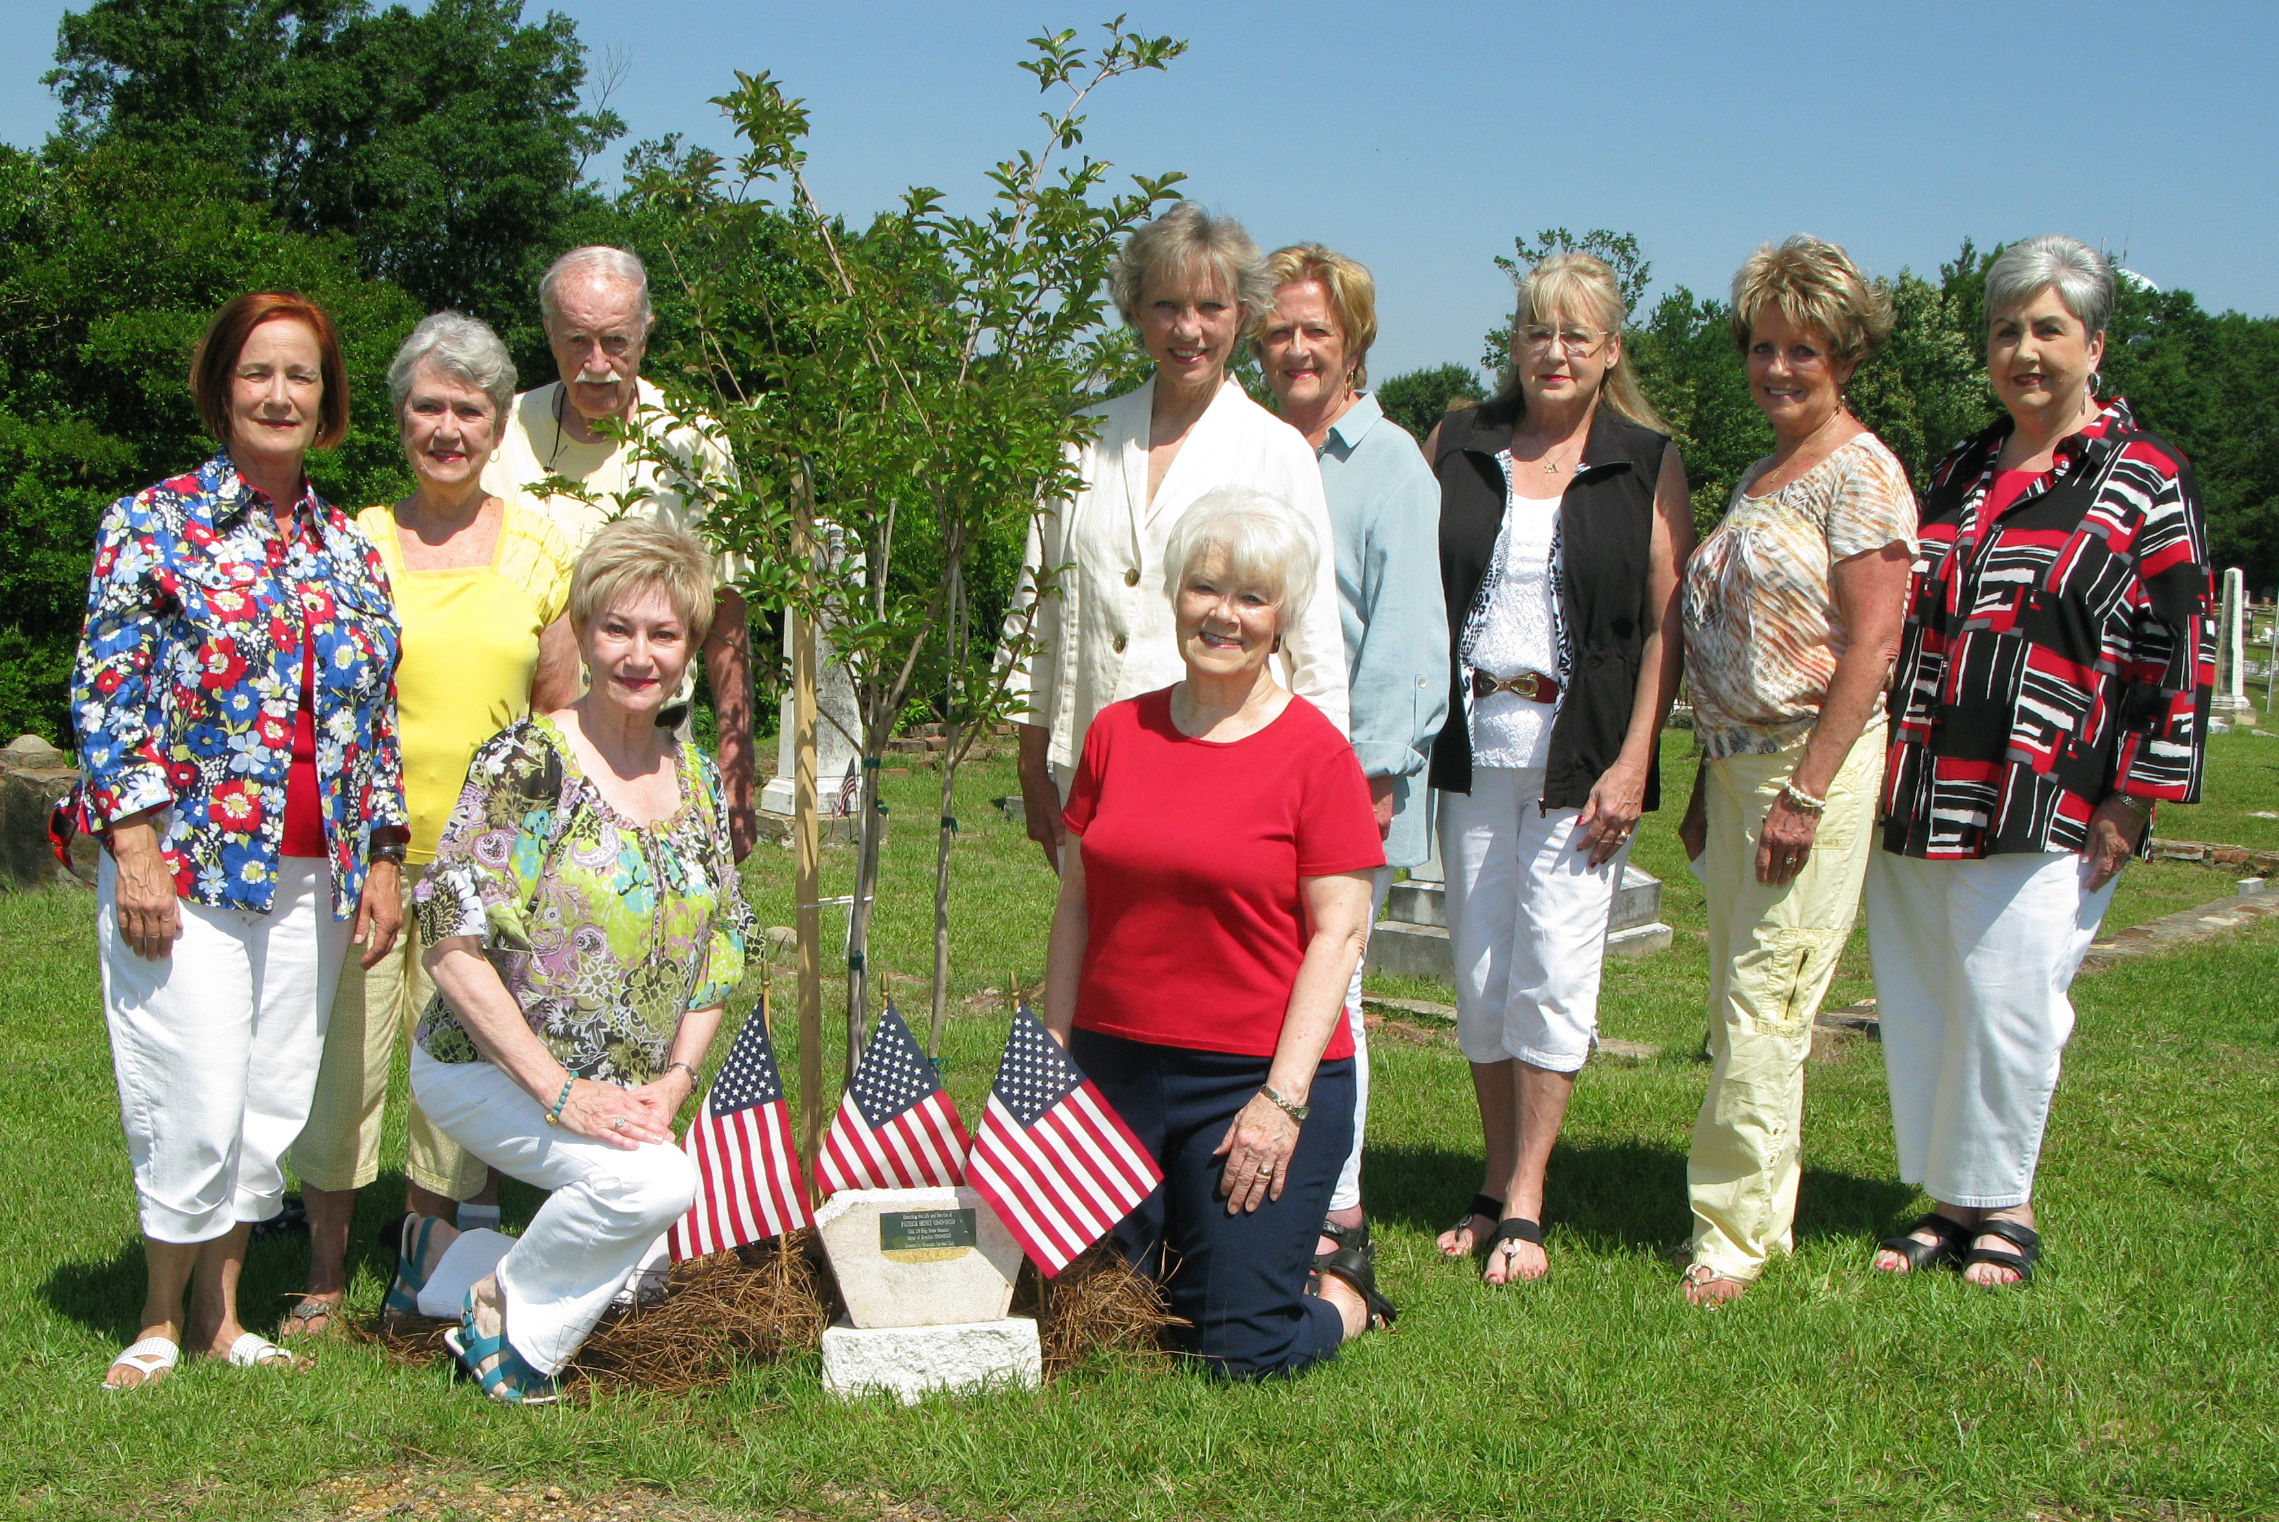  BRANDON GARDEN CLUB PLANTS&nbsp;MEMORIAL&nbsp;TREE  &nbsp;&nbsp; Brandon Garden Club (BGC), The Garden Clubs of Mississippi, Inc., planted a&nbsp;tree&nbsp;and placed a plaque in Old Brandon Cemetery honoring the life, work, and service of Major Pat